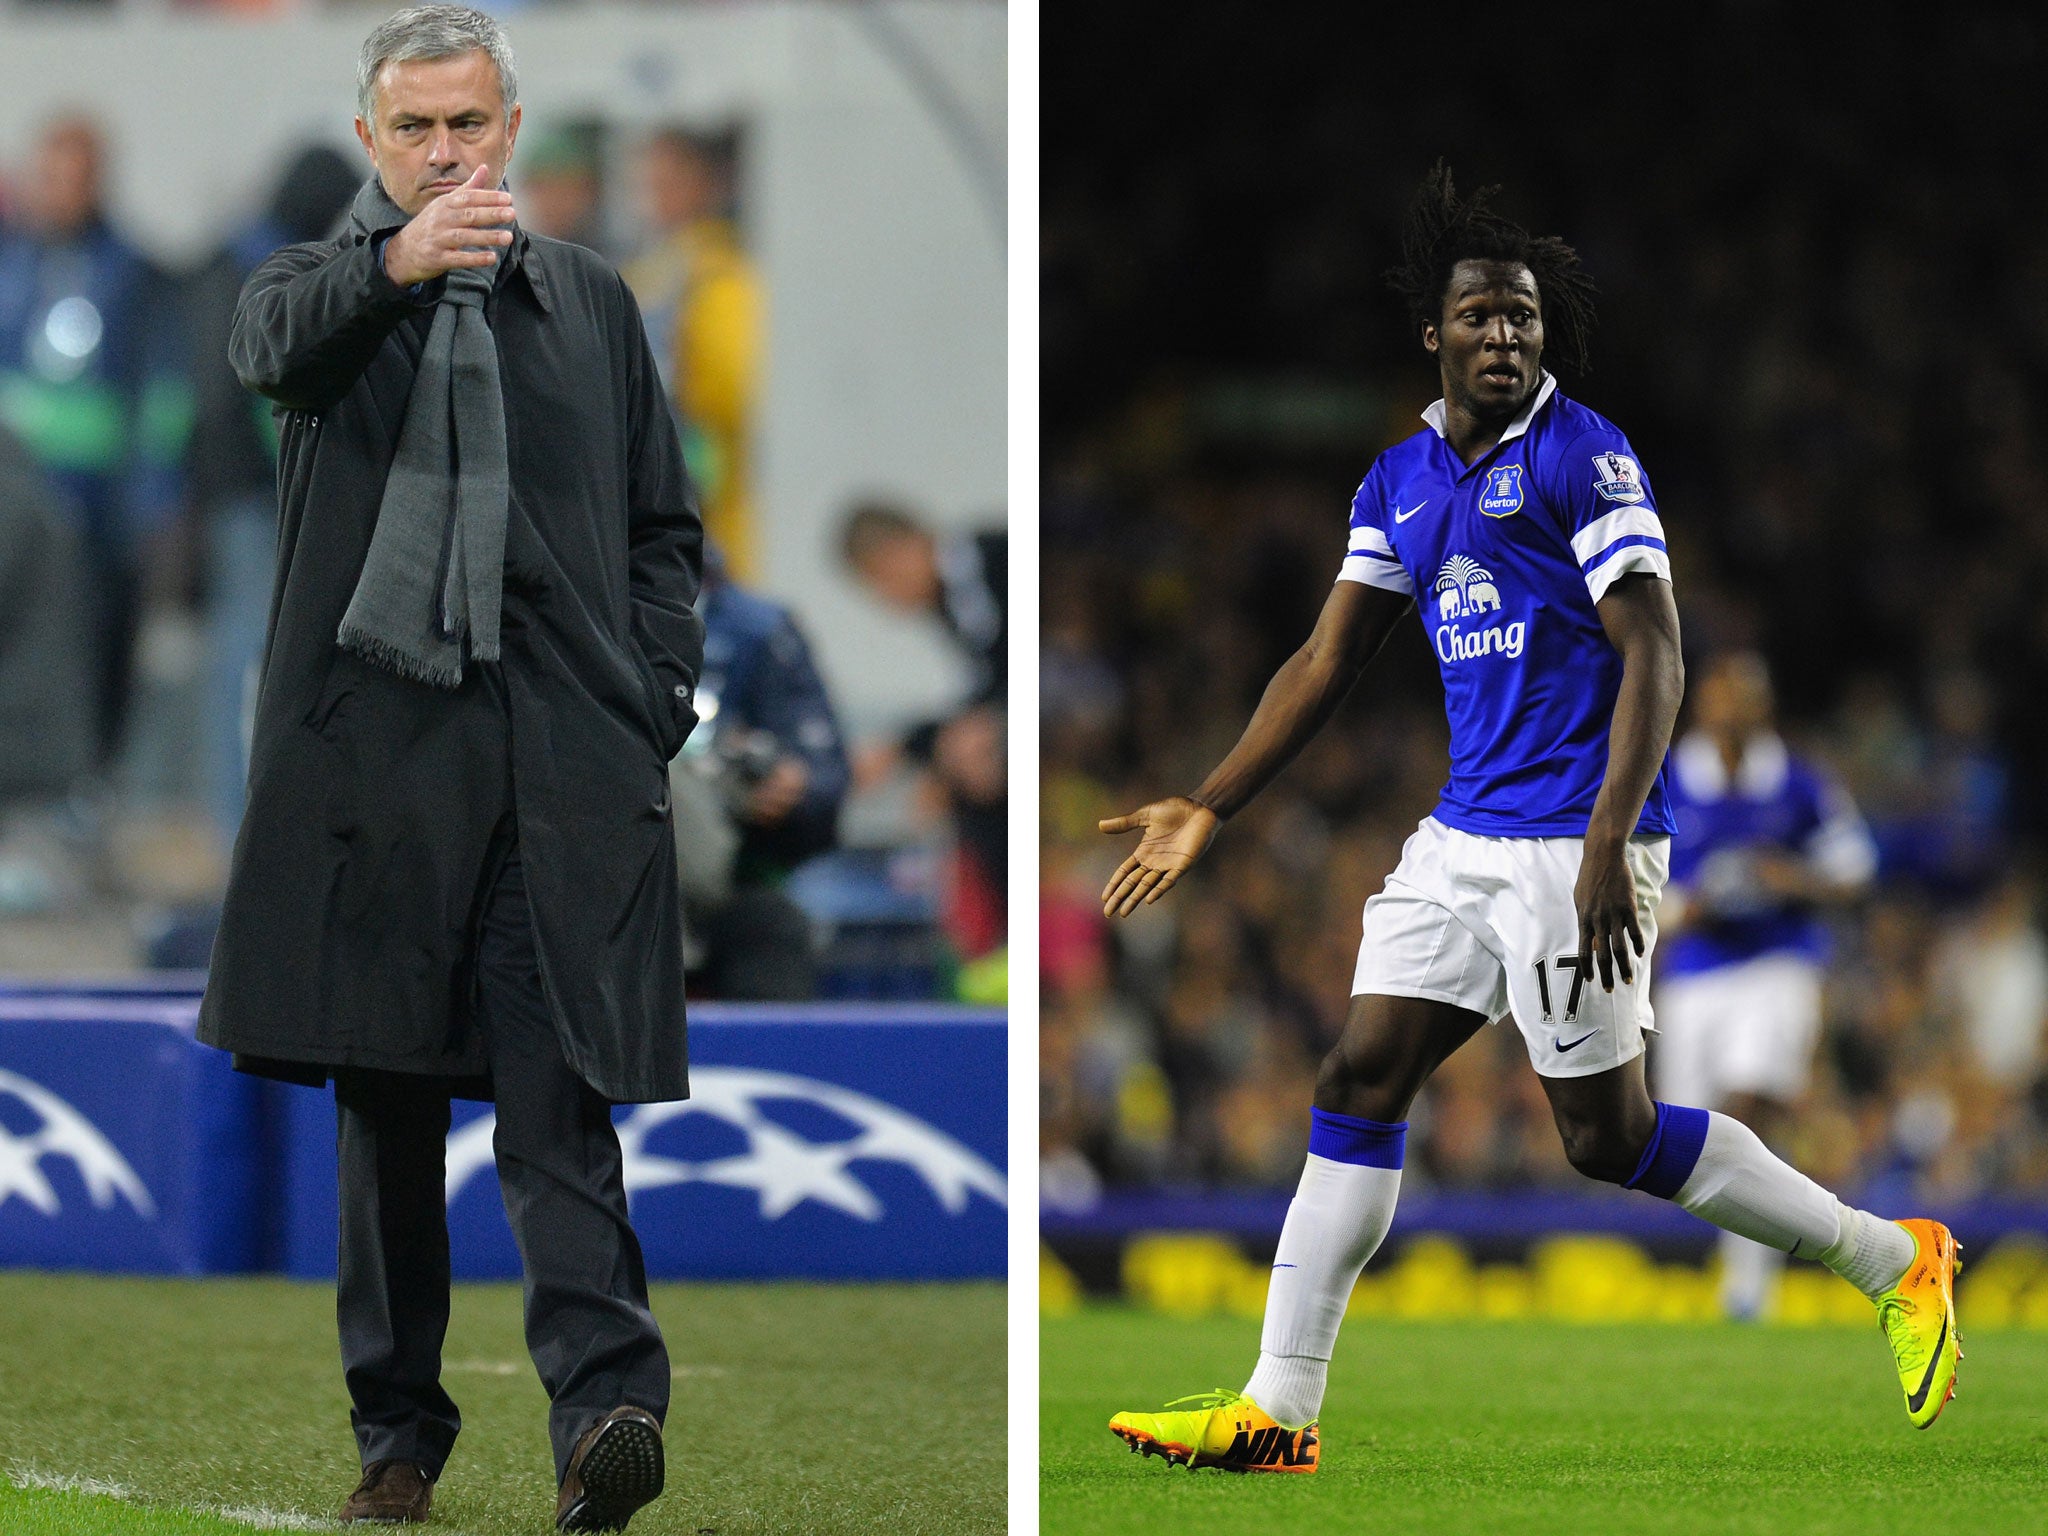 Jose Mourinho has claimed that it is one thing to play well for Everton, and it's another to play well for Chelsea, in response to Romelu Lukaku's loan to Everton